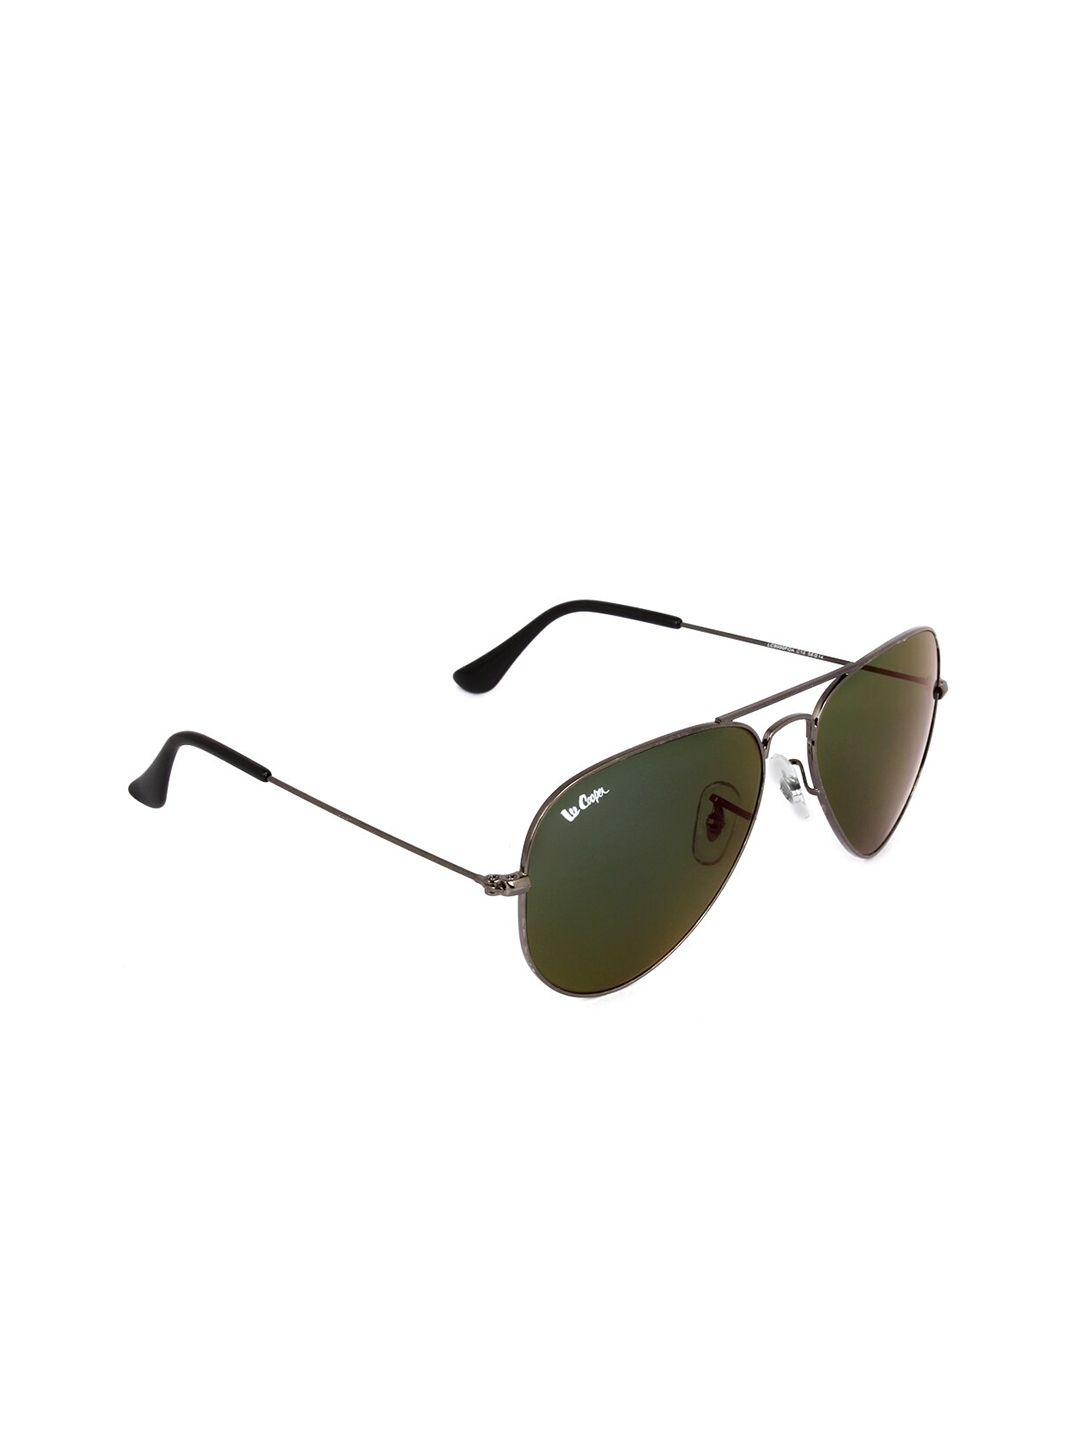 Lee Cooper Unisex Grey Lens Aviator Sunglasses with UV Protected Lens LC9000FOA C10 Price in India